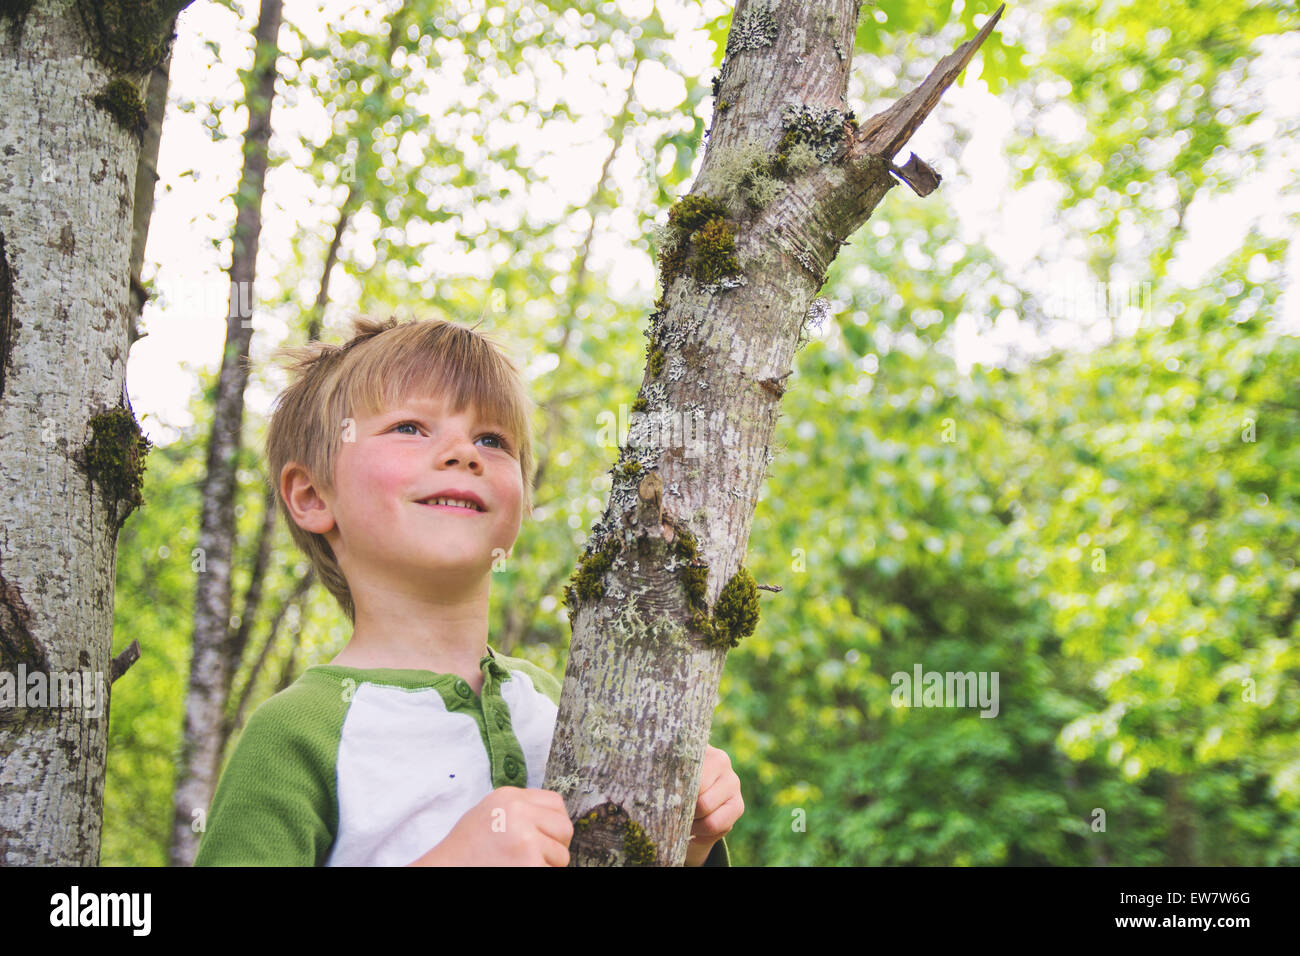 Smiling boy sitting in a tree Banque D'Images